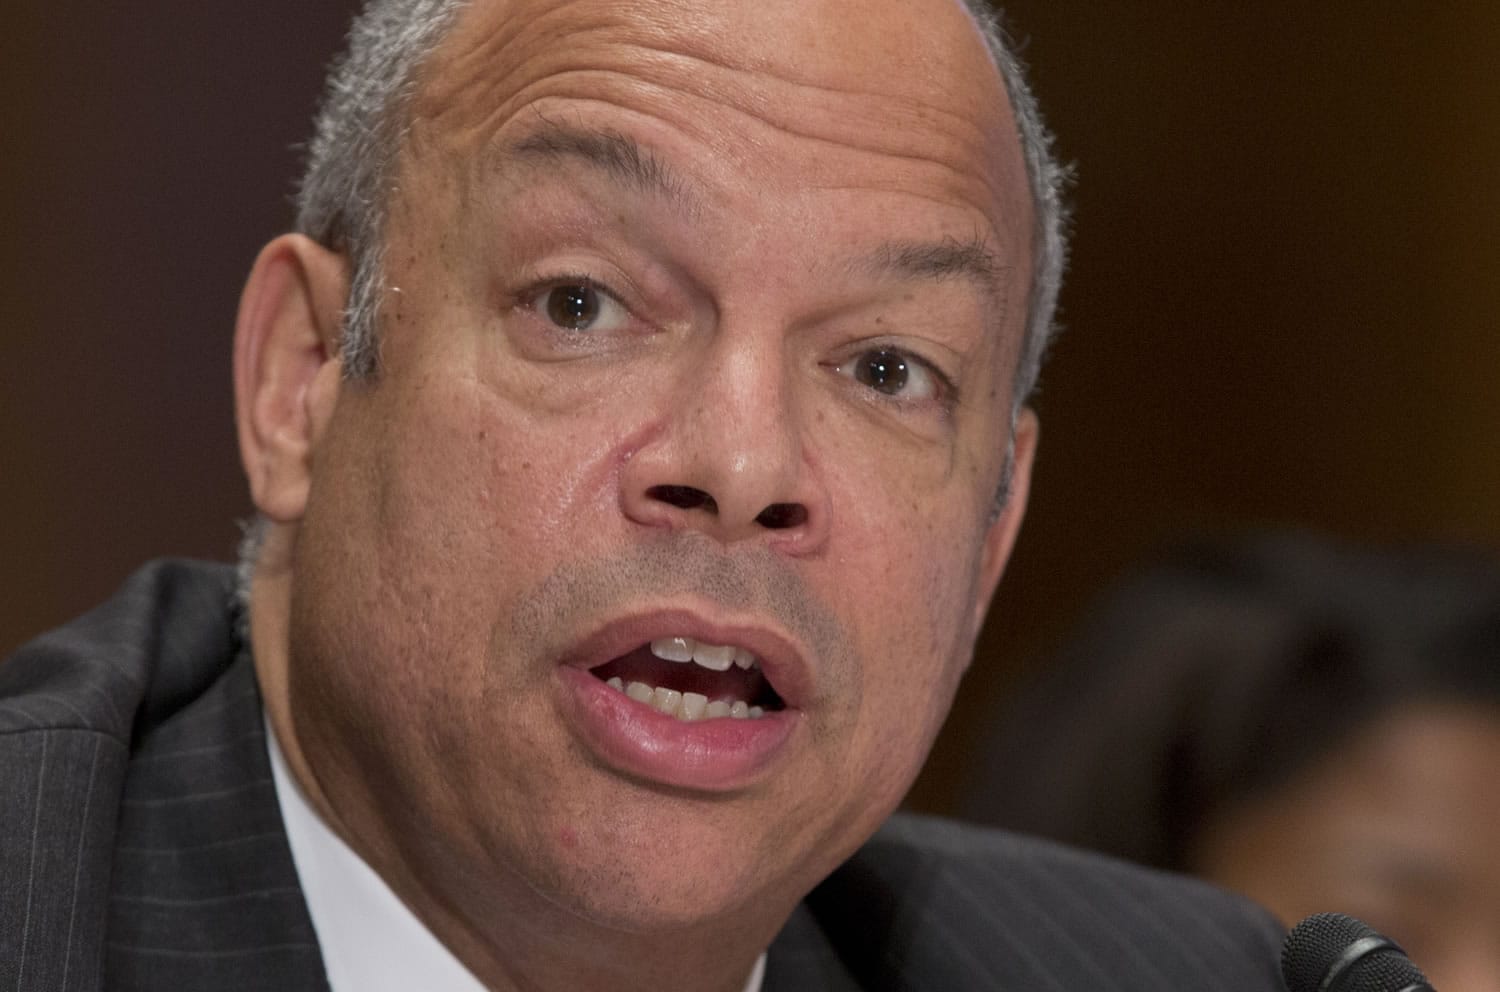 Jeh Johnson, President Barack Obama's choice to become Homeland Security Secretary, testifies on Capitol Hill in Washington on Wednesday before the Senate Homeland Security and Governmental Affairs Committee hearing on his nomination.